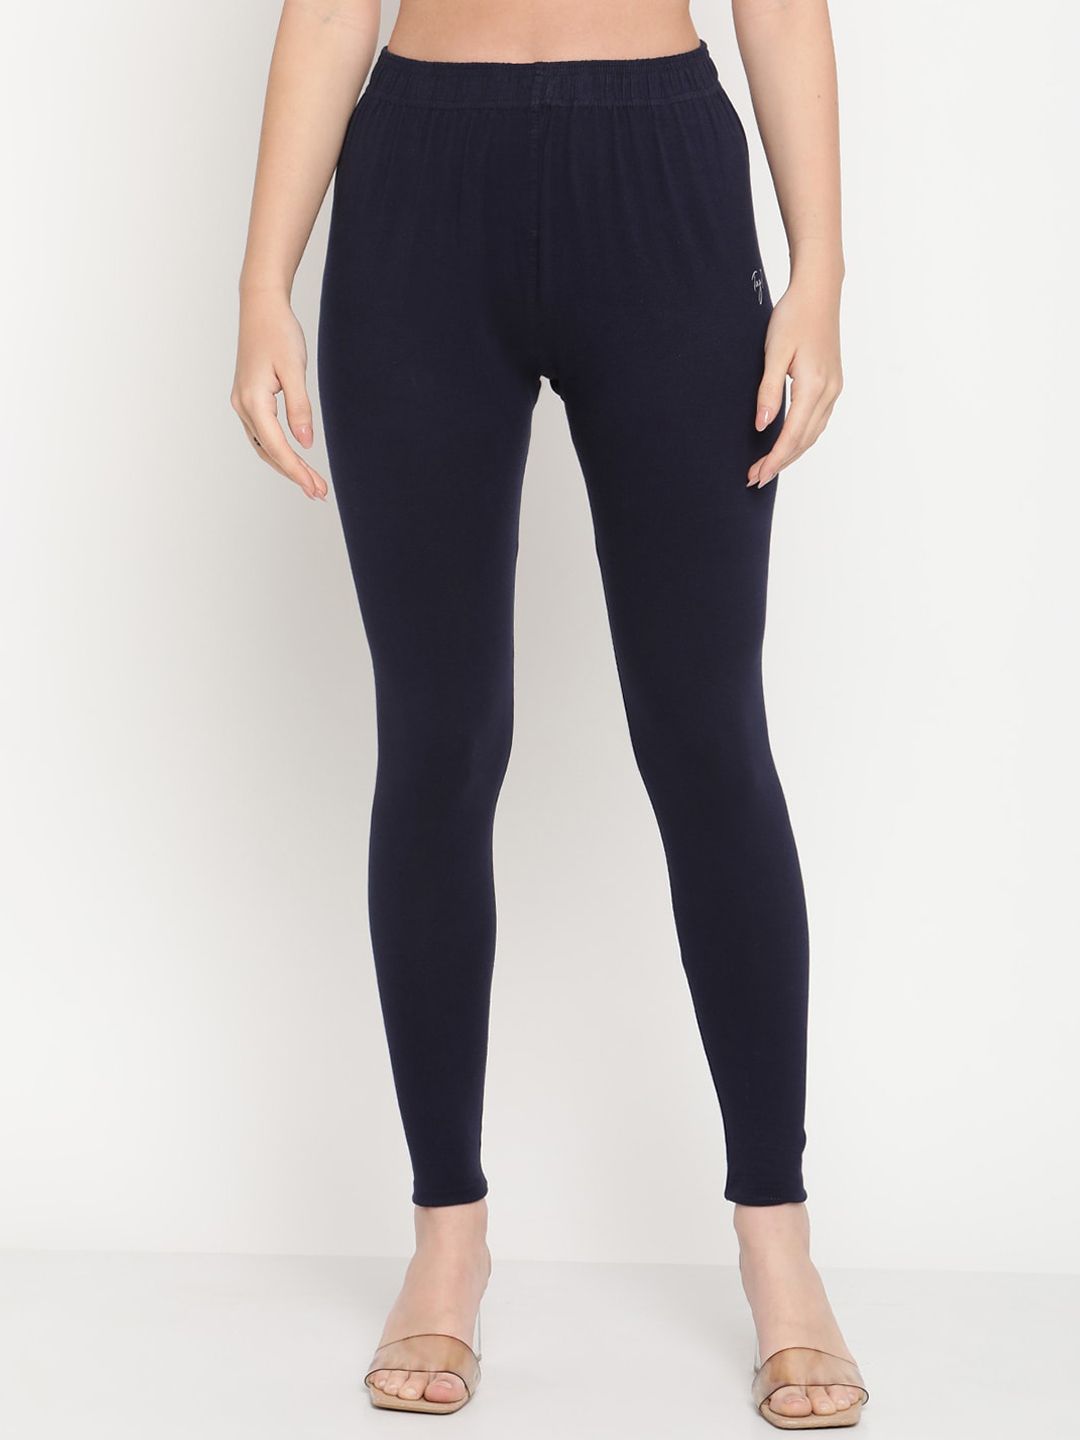 TAG 7 Women Navy Blue Solid Ankle-Length Legging Price in India